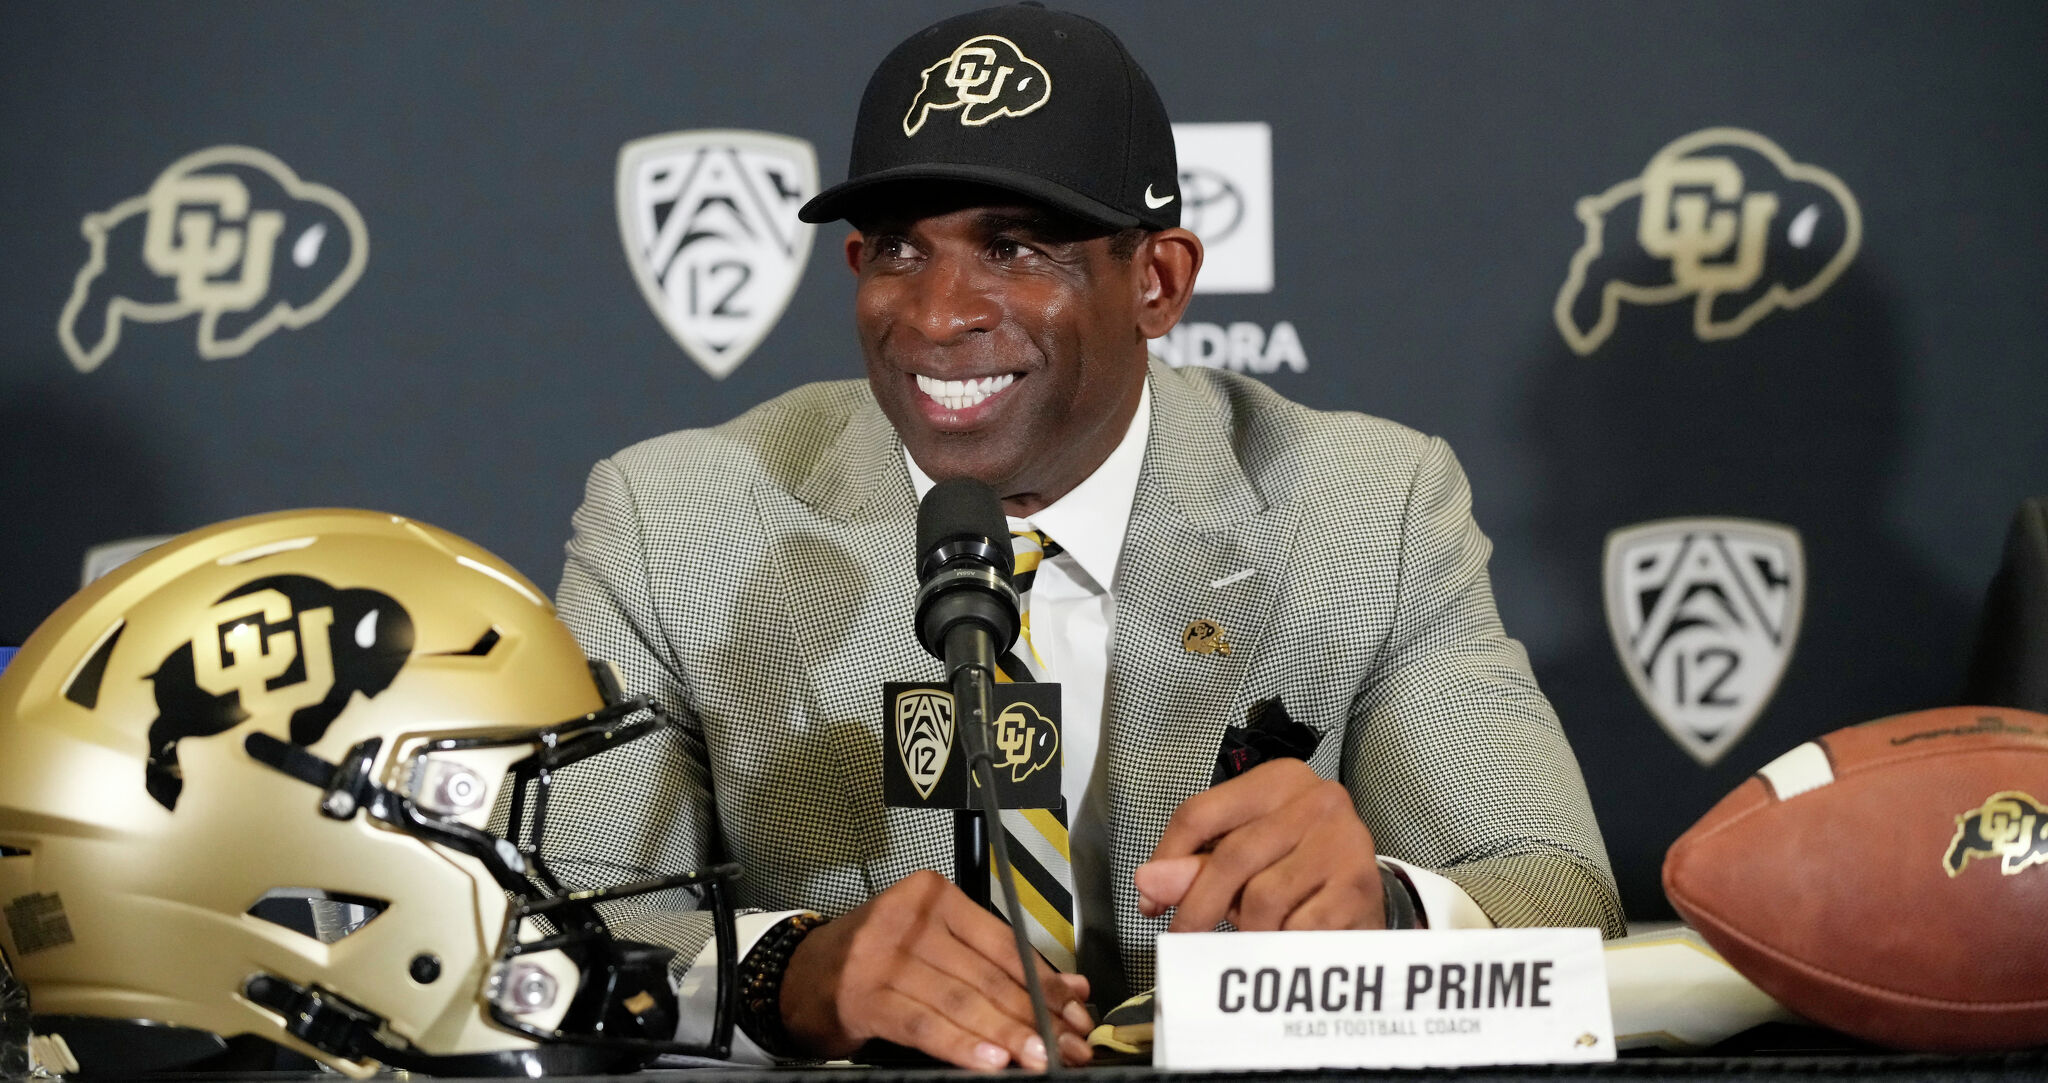 Solomon: Deion Sanders showed what could be accomplished at HBCUs